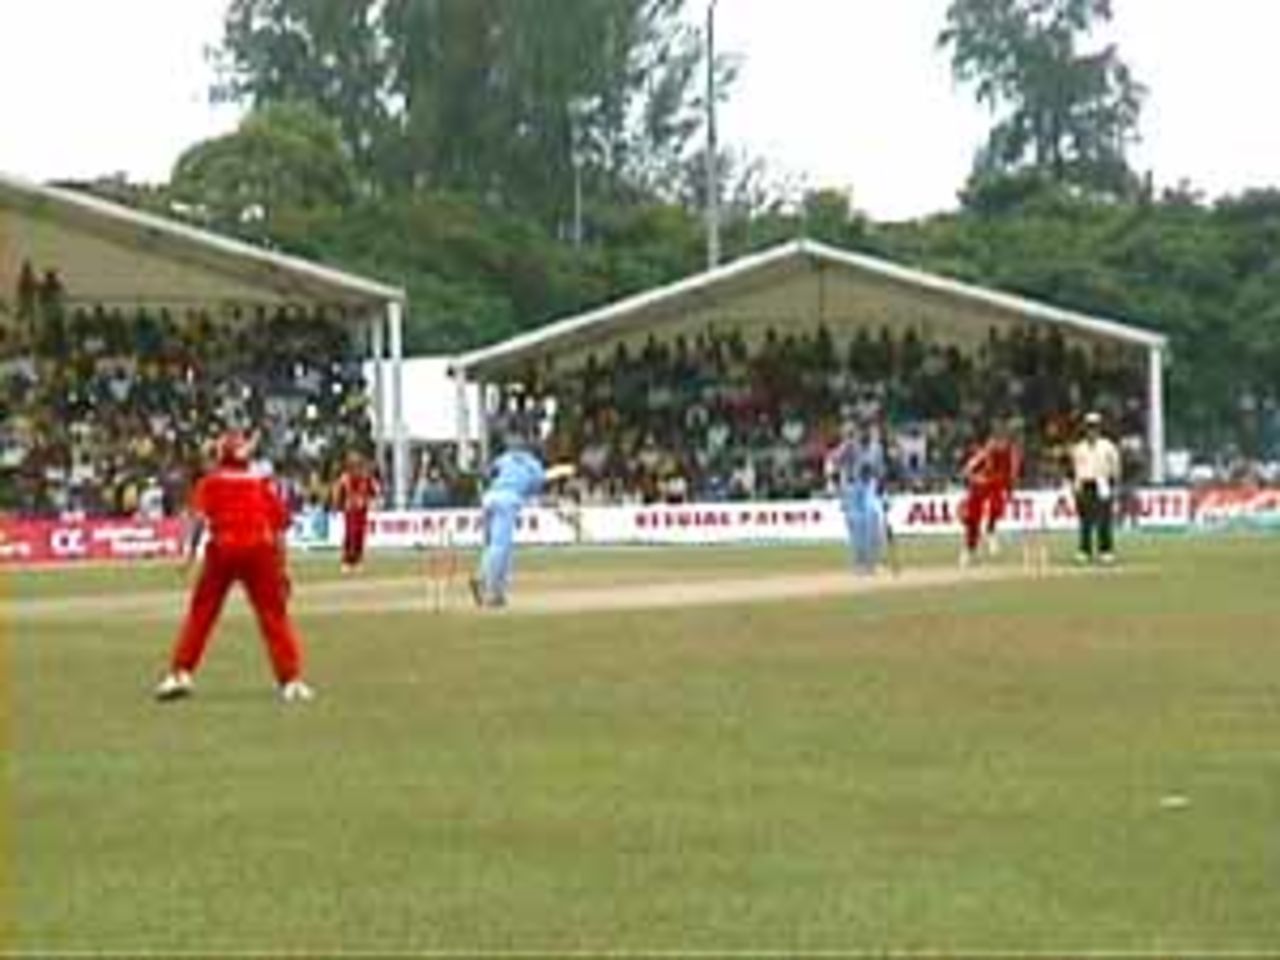 Tendulkar leans into his shot, as he plays a ball through mid-wicket, India v Zimbabwe (2nd ODI), Coca-Cola Singapore Challenge, 1999-2000, Kallang Ground, Singapore, 4 Sep 1999.